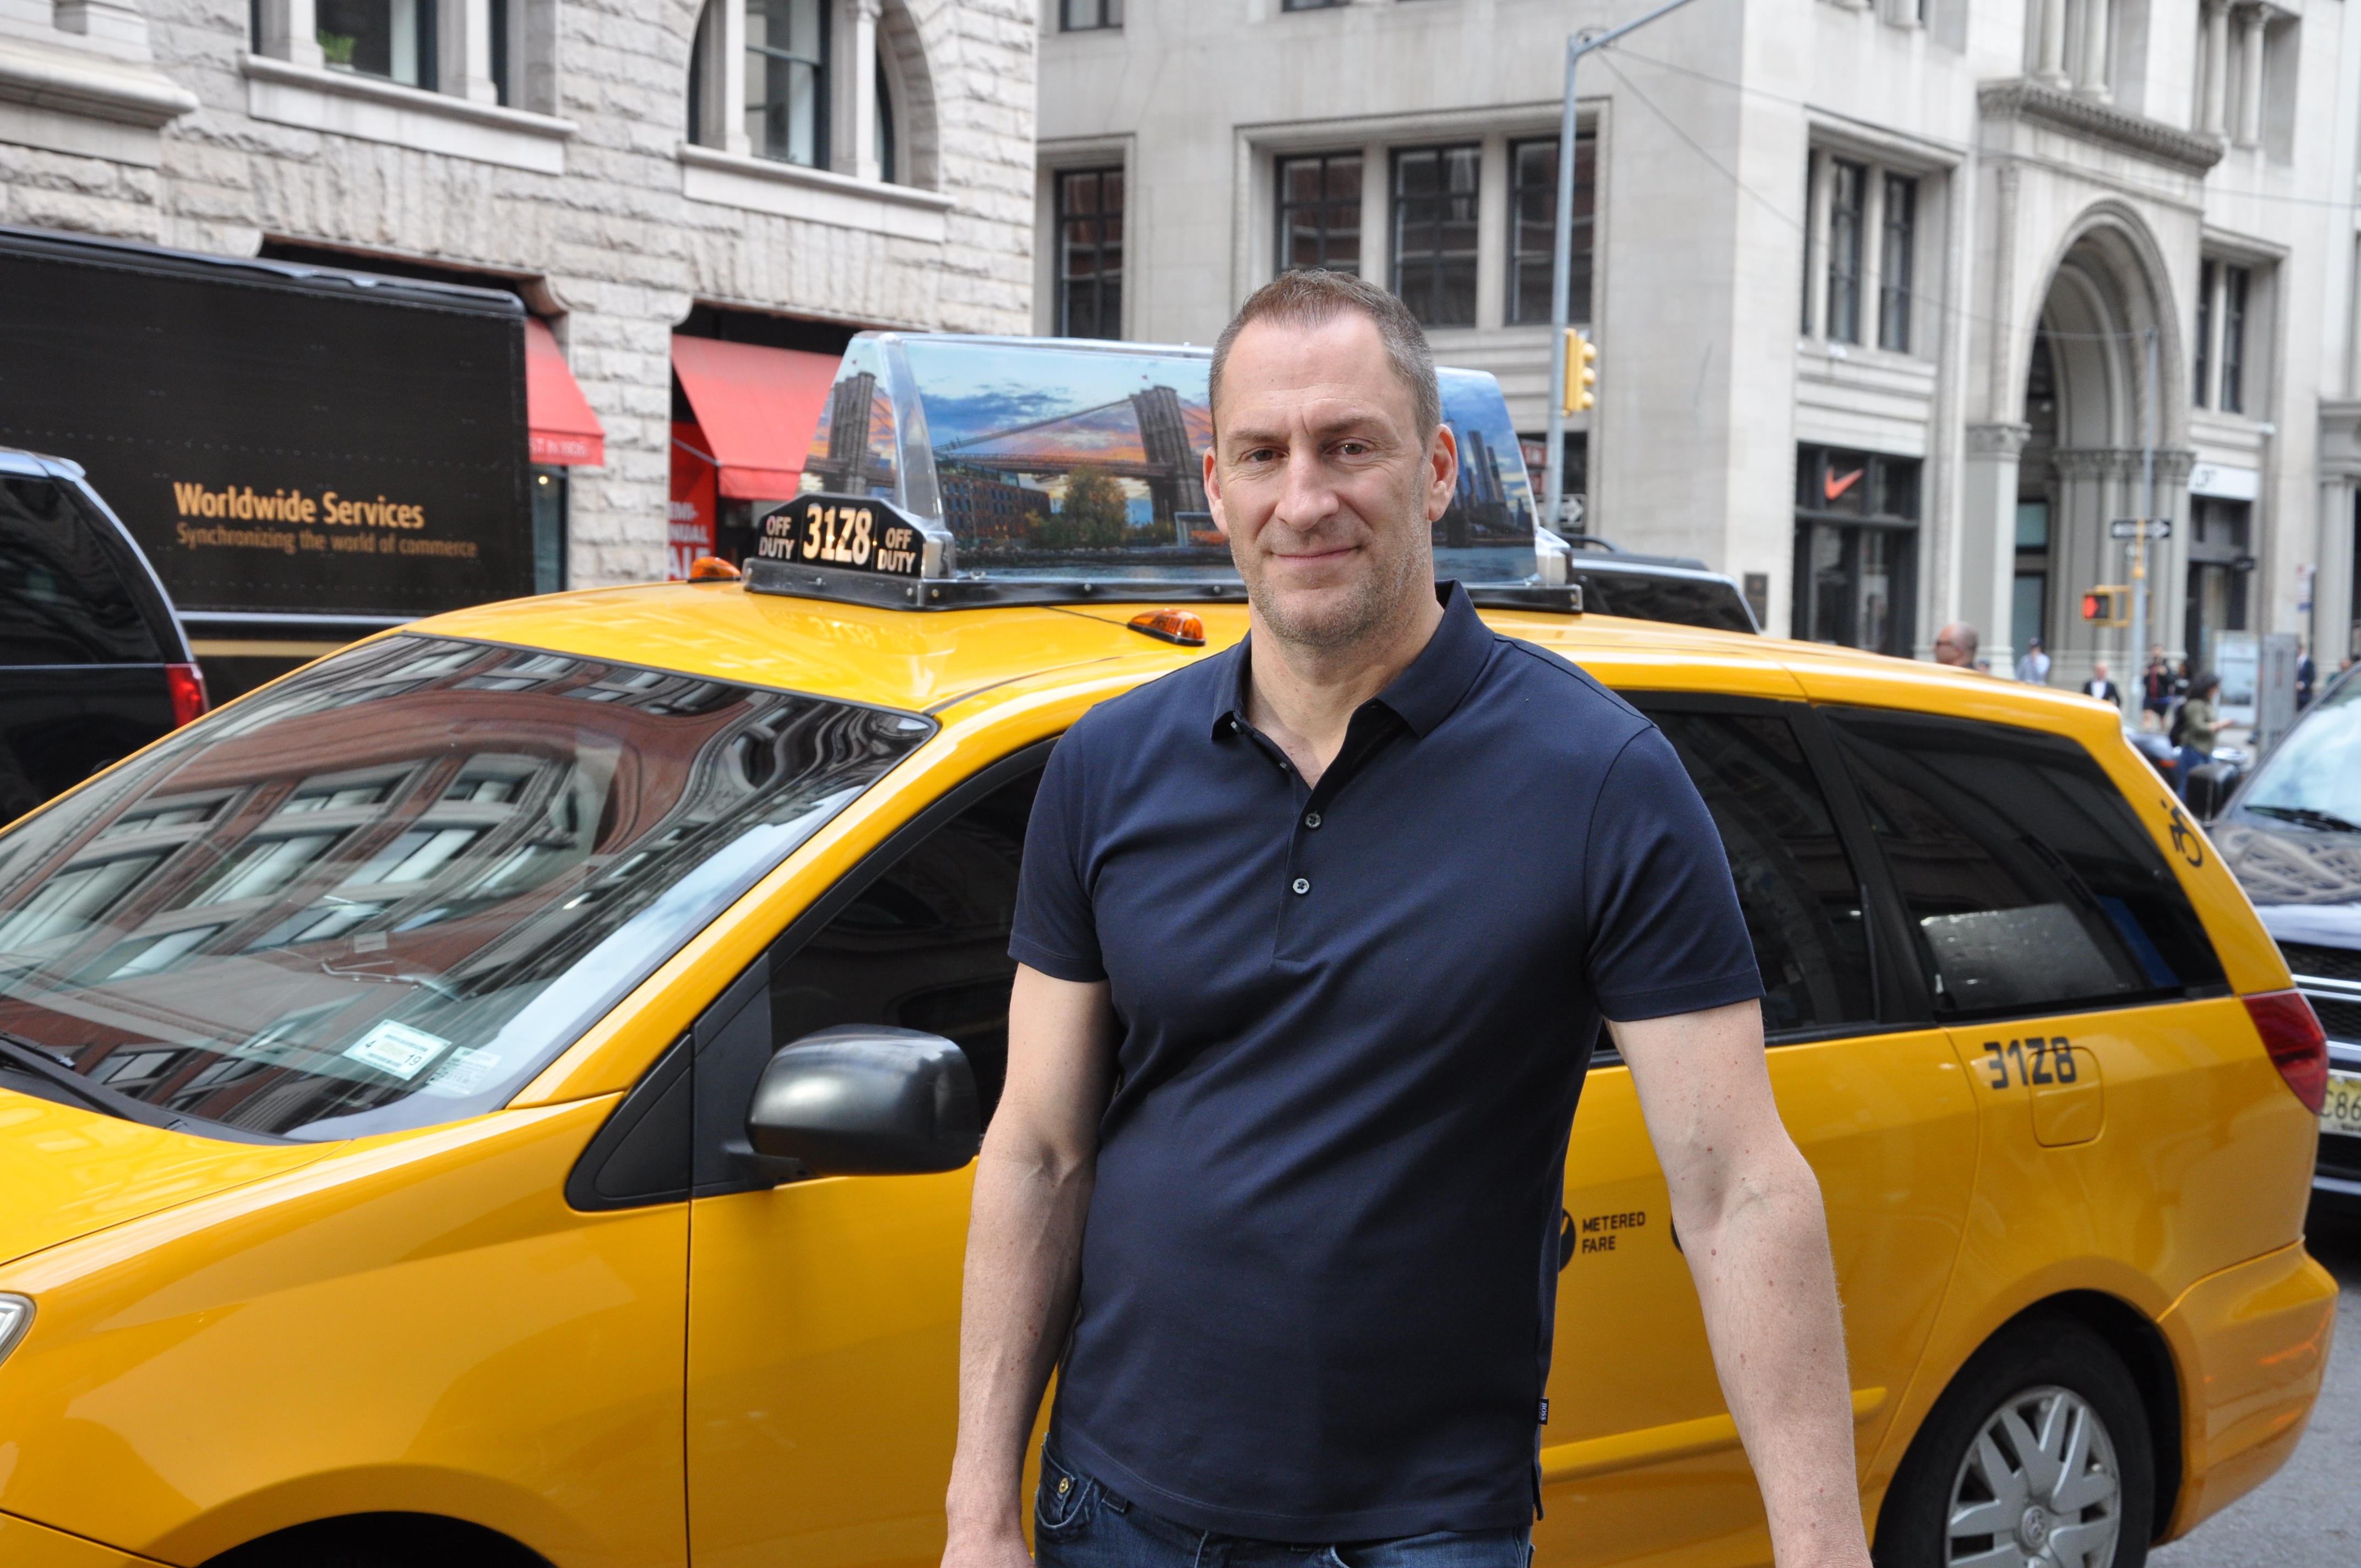 Cash Cab: Ben Bailey Game Show Returns This Summer on Discovery ...